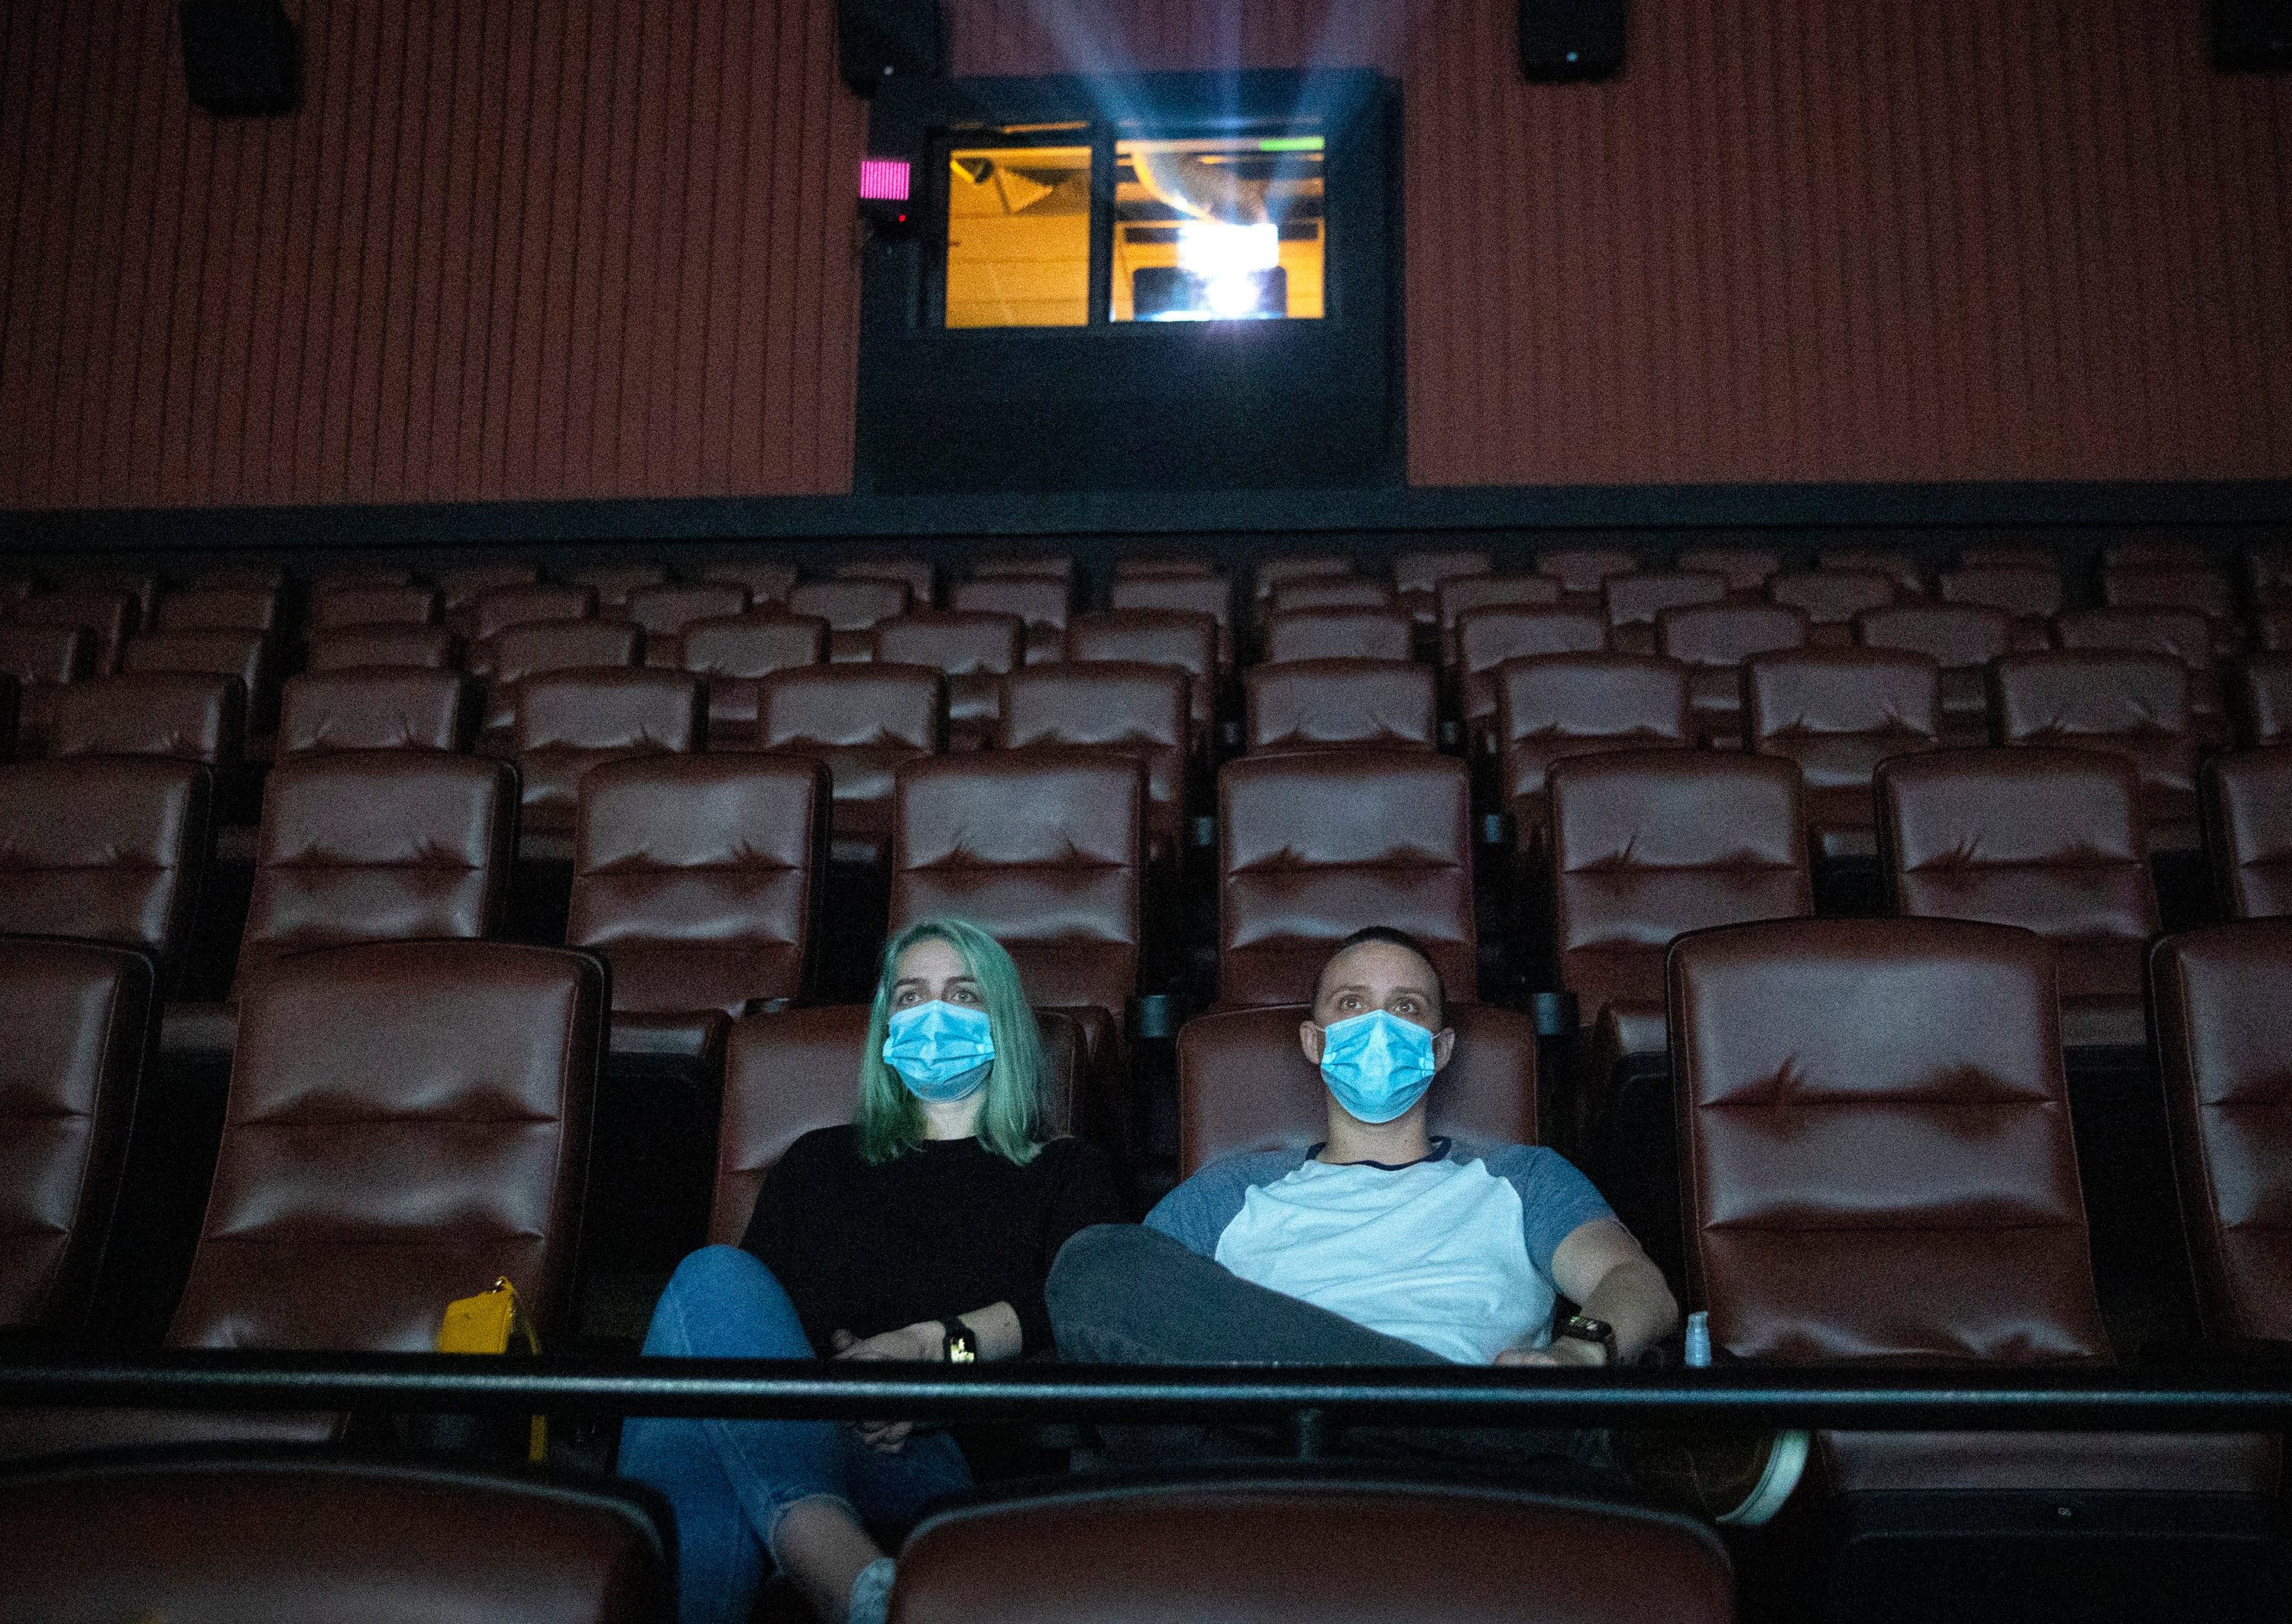 Kayleigh Tansey and Justin Smith, of Kyle, watch the movie "The Invisible Man" at EVO Entertainment on Monday May 4, 2020.  The movie theater in Kyle reopened Monday after Gov. Greg Abbott last week lifted the shelter in place order and allowed retail stores, restaurants and some other businesses to open to the public at no more than 25% capacity.